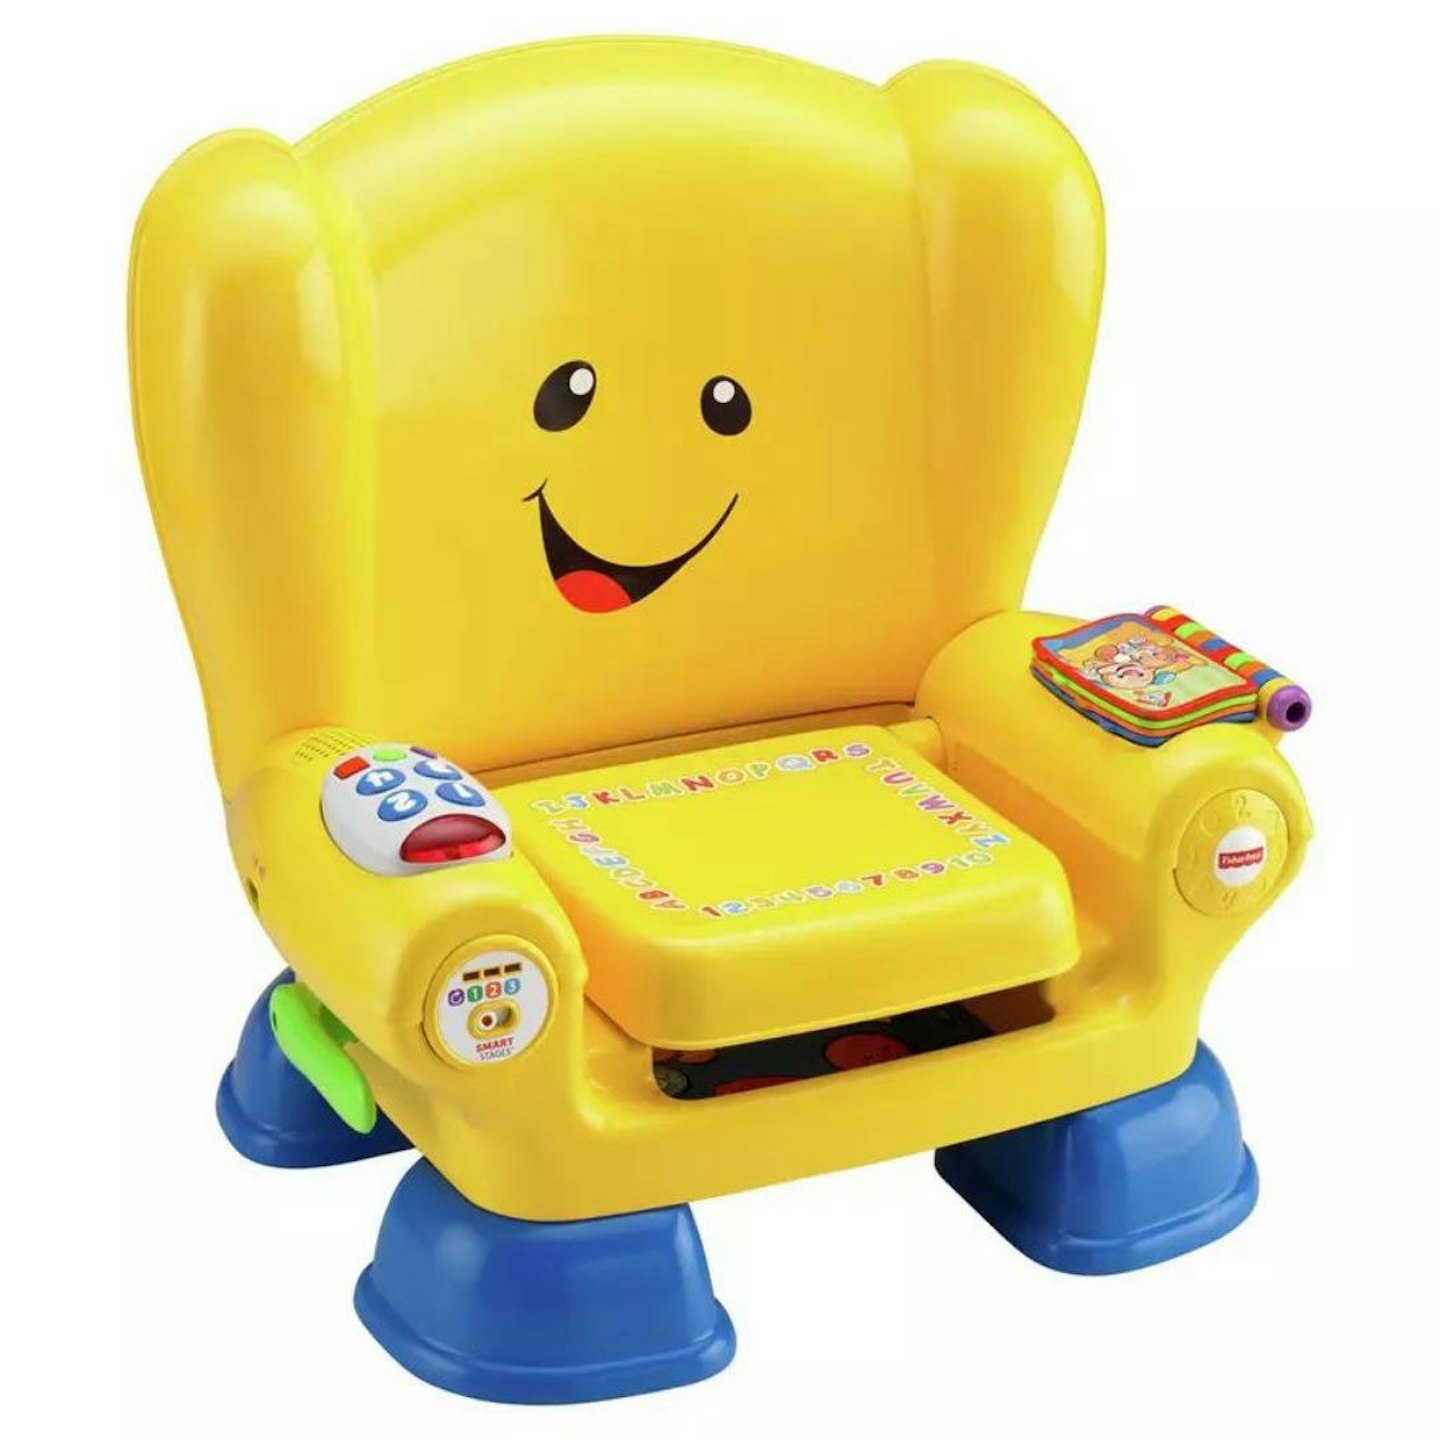 The Best Toys For One-Year-Olds: Fisher-Price Laugh & Learn Smart Stages Chair